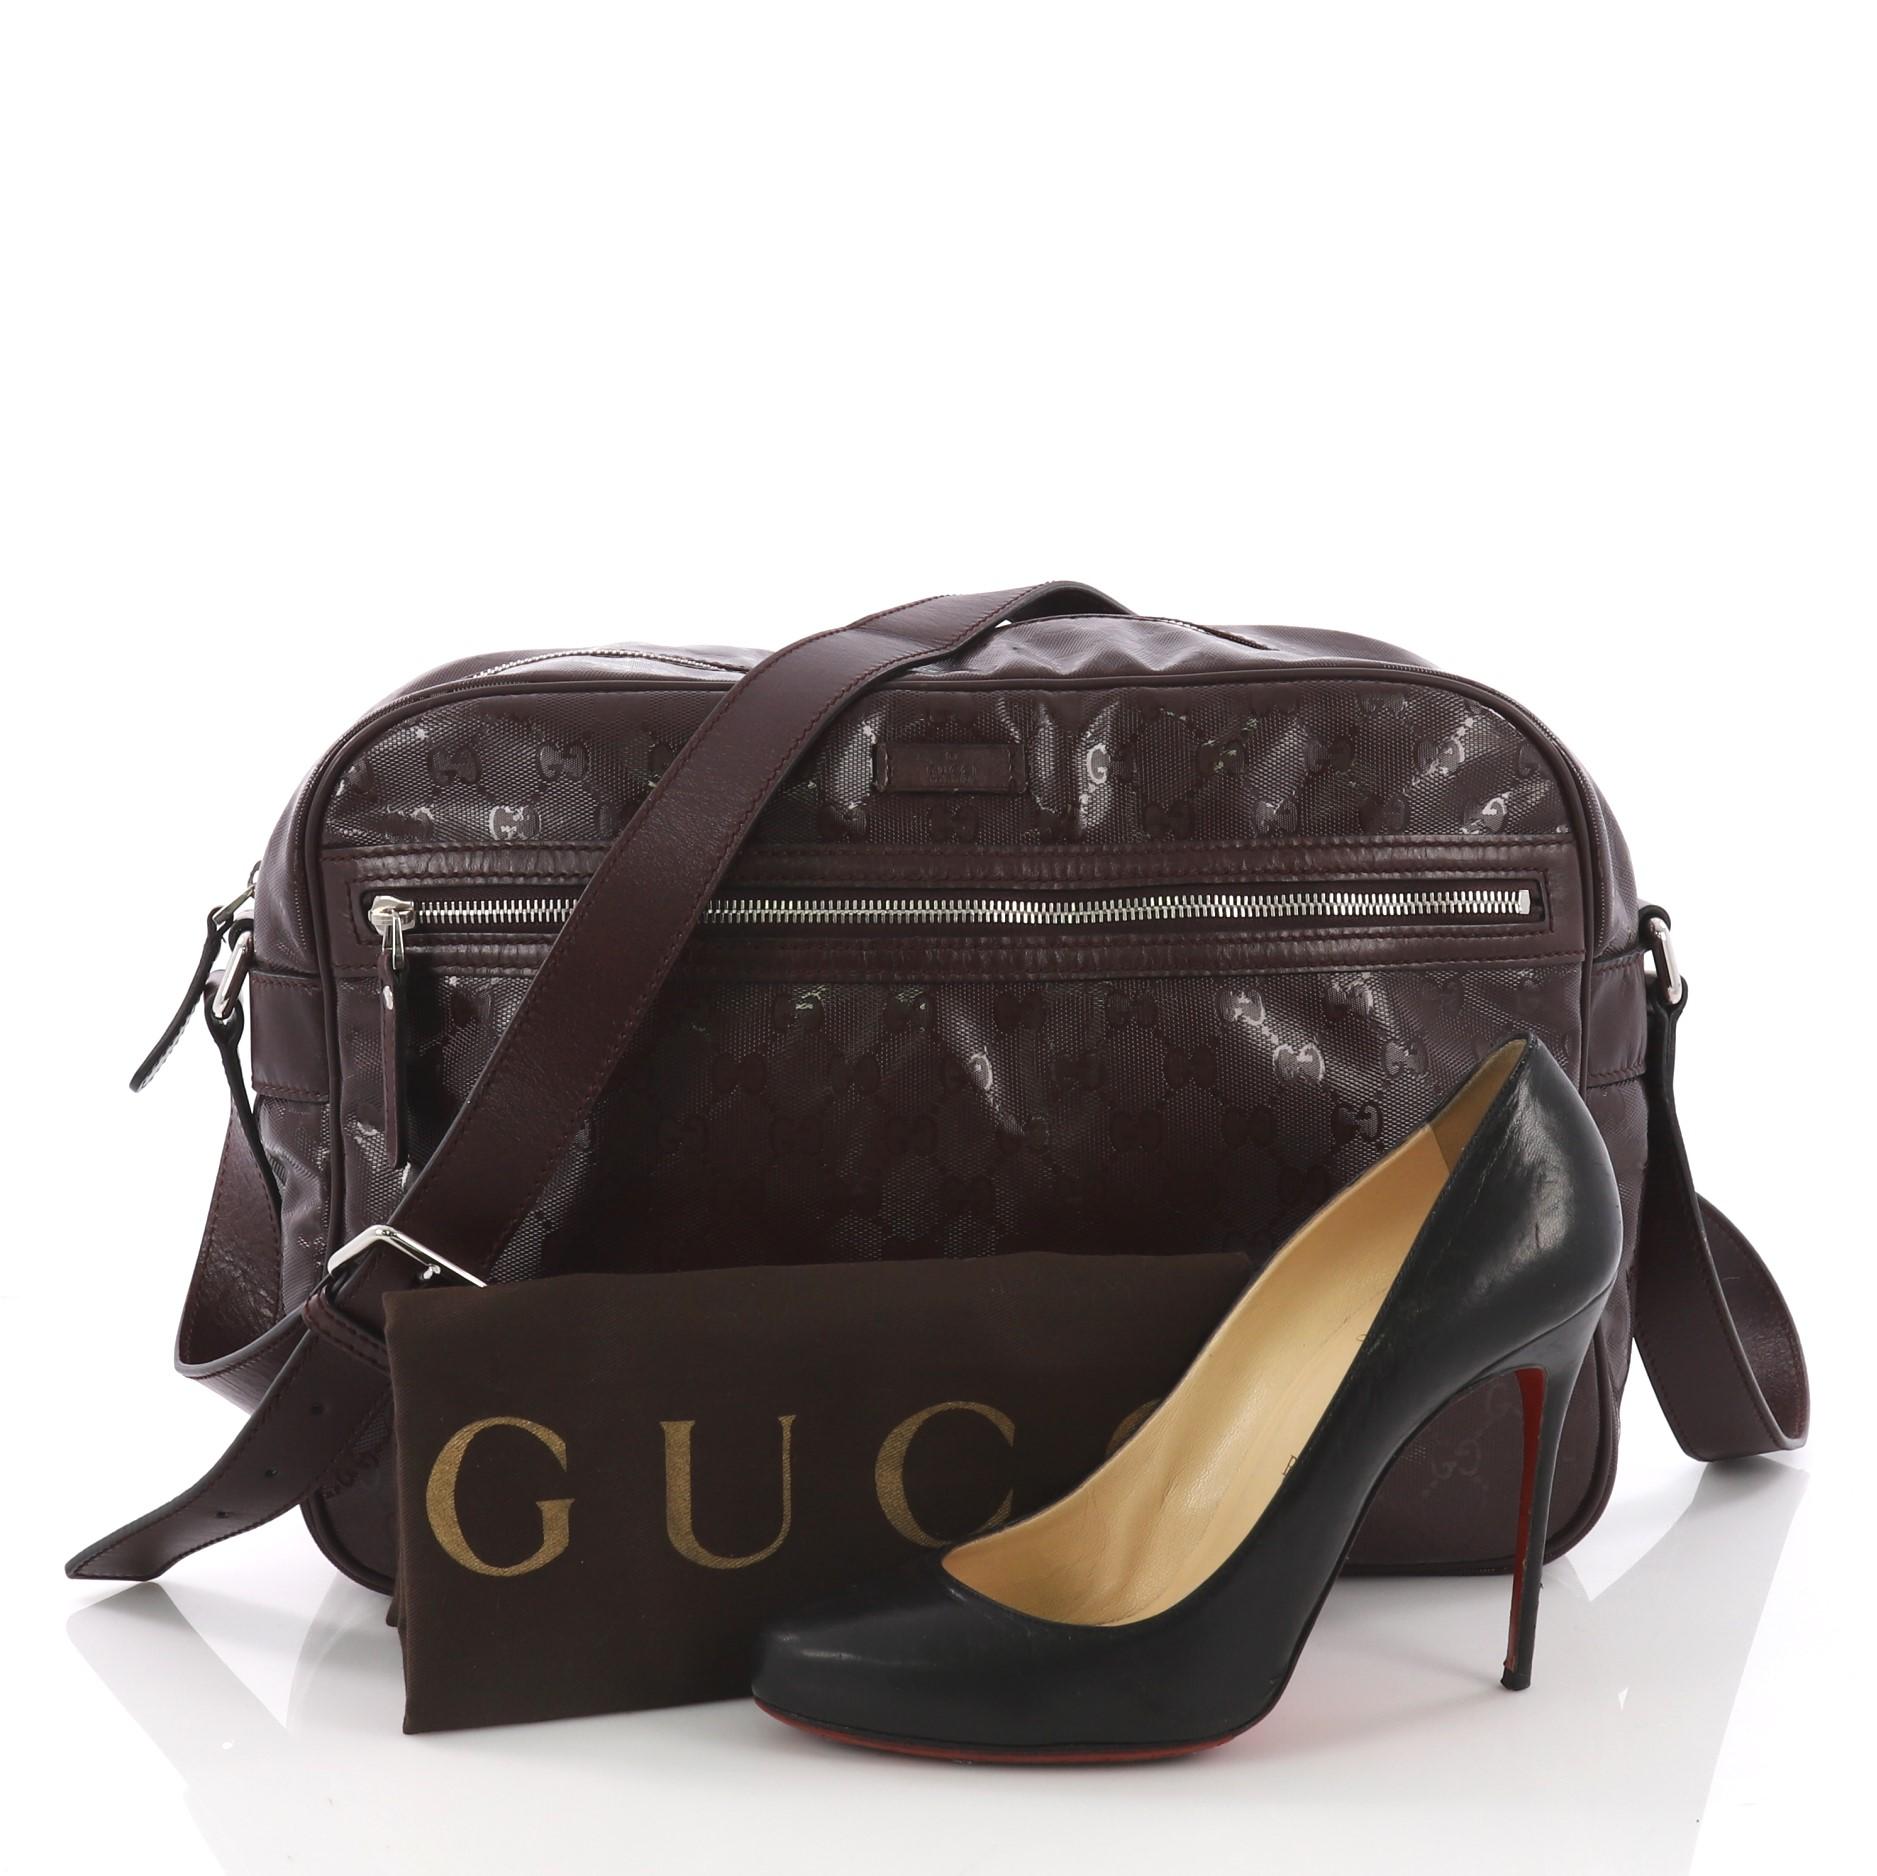 This Gucci Zip Messenger Bag GG Imprime Small, crafted from burgundy GG imprime, features an adjustable shoulder strap, and silver-tone hardware. Its zip closure opens to a burgundy fabric interior with side zip pocket. **Note: Shoe photographed is